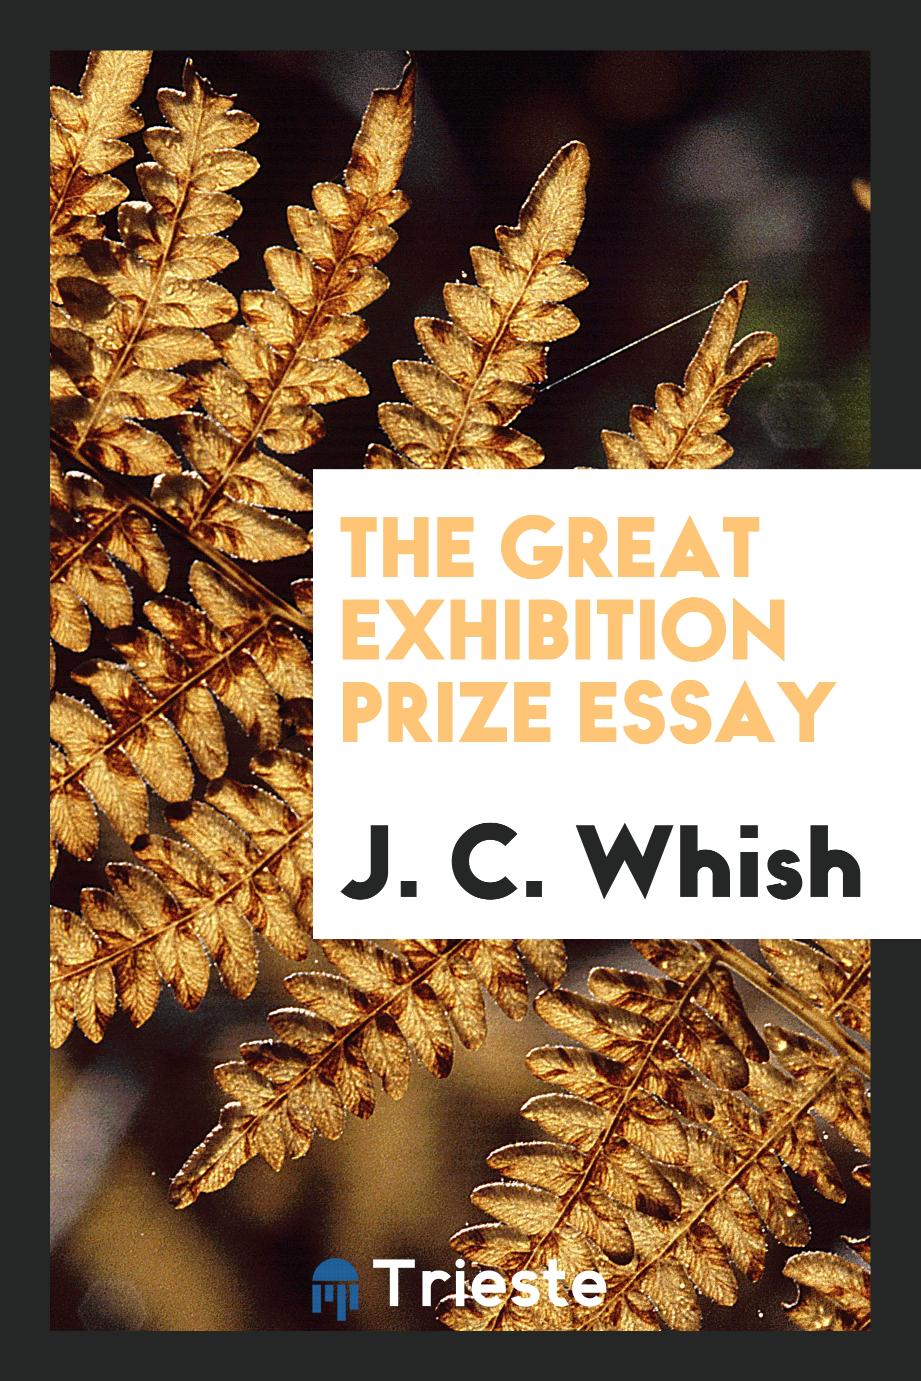 The Great Exhibition Prize Essay